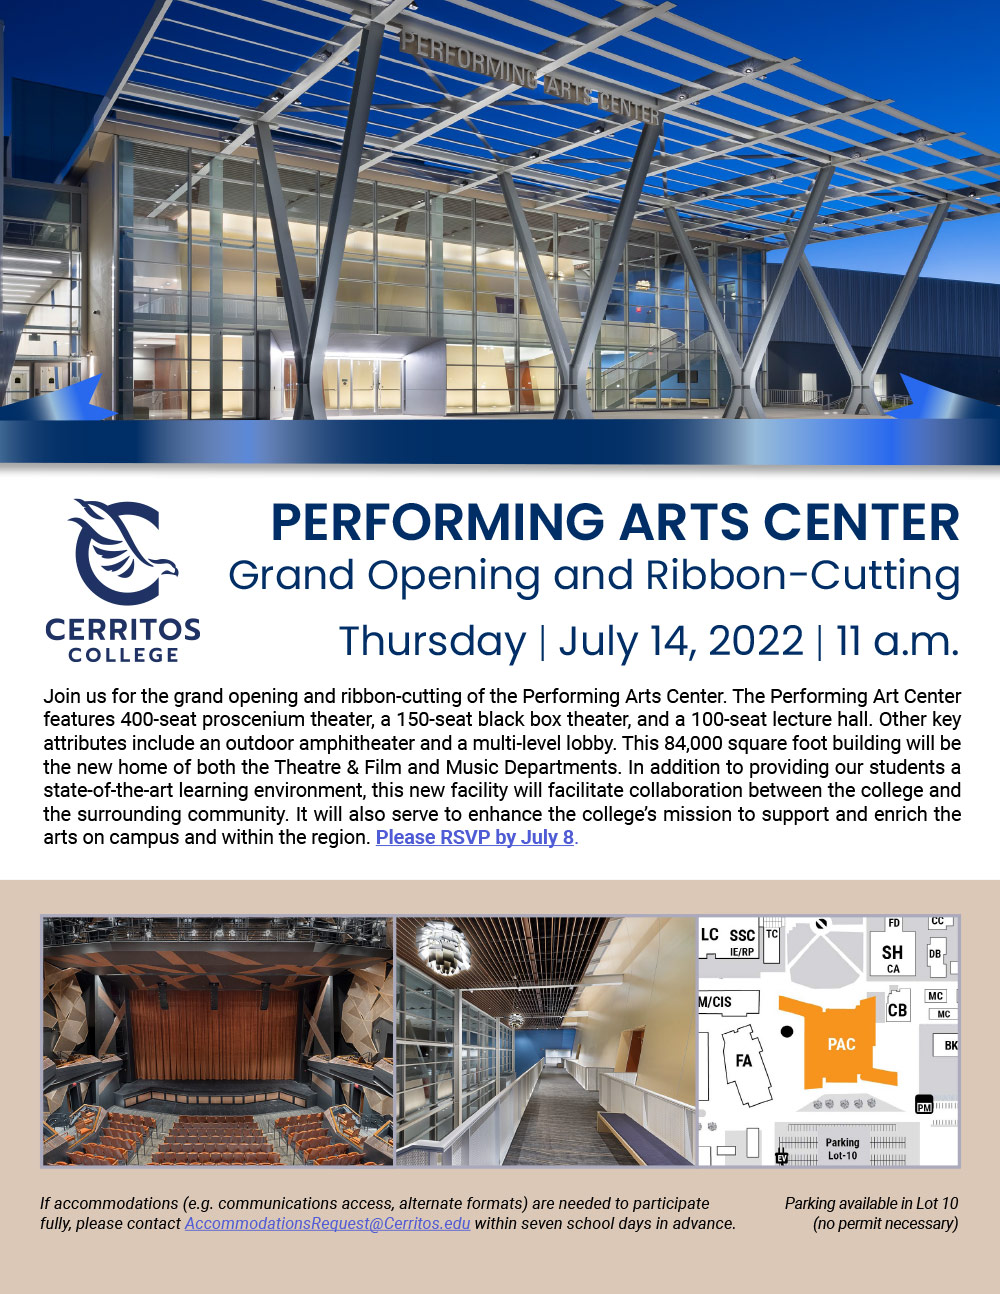 Cerritos College Performing Arts Center Grand Opening and Ribbon Cutting